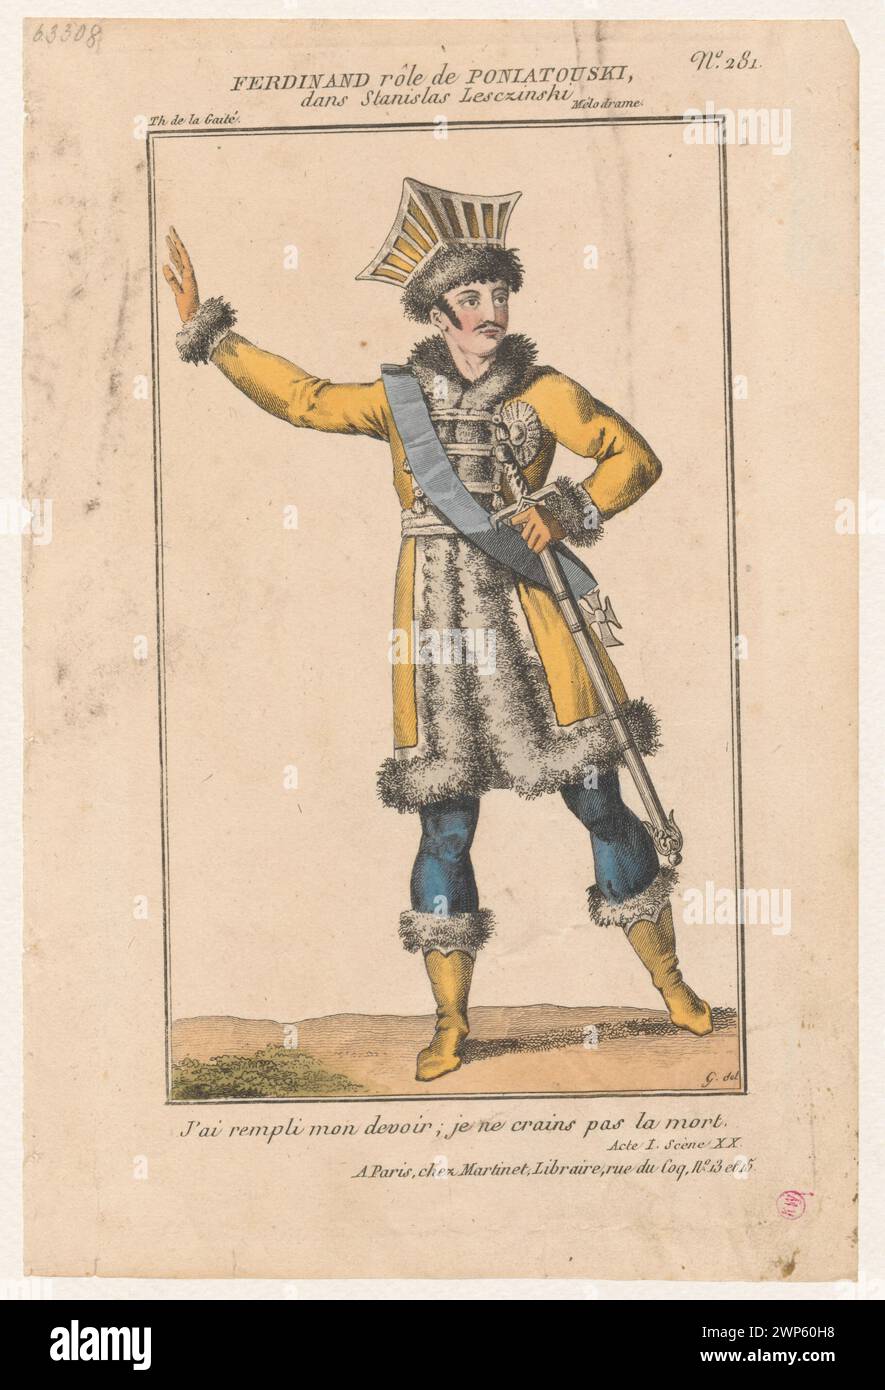 French actor Ferdinand as the book of Józef Poniatowski; unknown, G. (Fl. Ca 1810), Martinet (Paris; Printing and Prince; 1796-1867); 1811 (1811-00-00-1811-00-00);Poniatowski, Józef (1763-1813), Poniatowski, Józef (1763-1813)-iconography, Stanisław Leszczyński (King of Poland-1677-1766), Woźnicki, Kazimierz (1878-1949), Woźnicki, Kazimierz (1878-1949)-collection , actors, gift (provenance), Napoleonic era (1799-1815), French (culture), French graphics, costumes, Poland (culture), cornea (costume.), Theaters Stock Photo